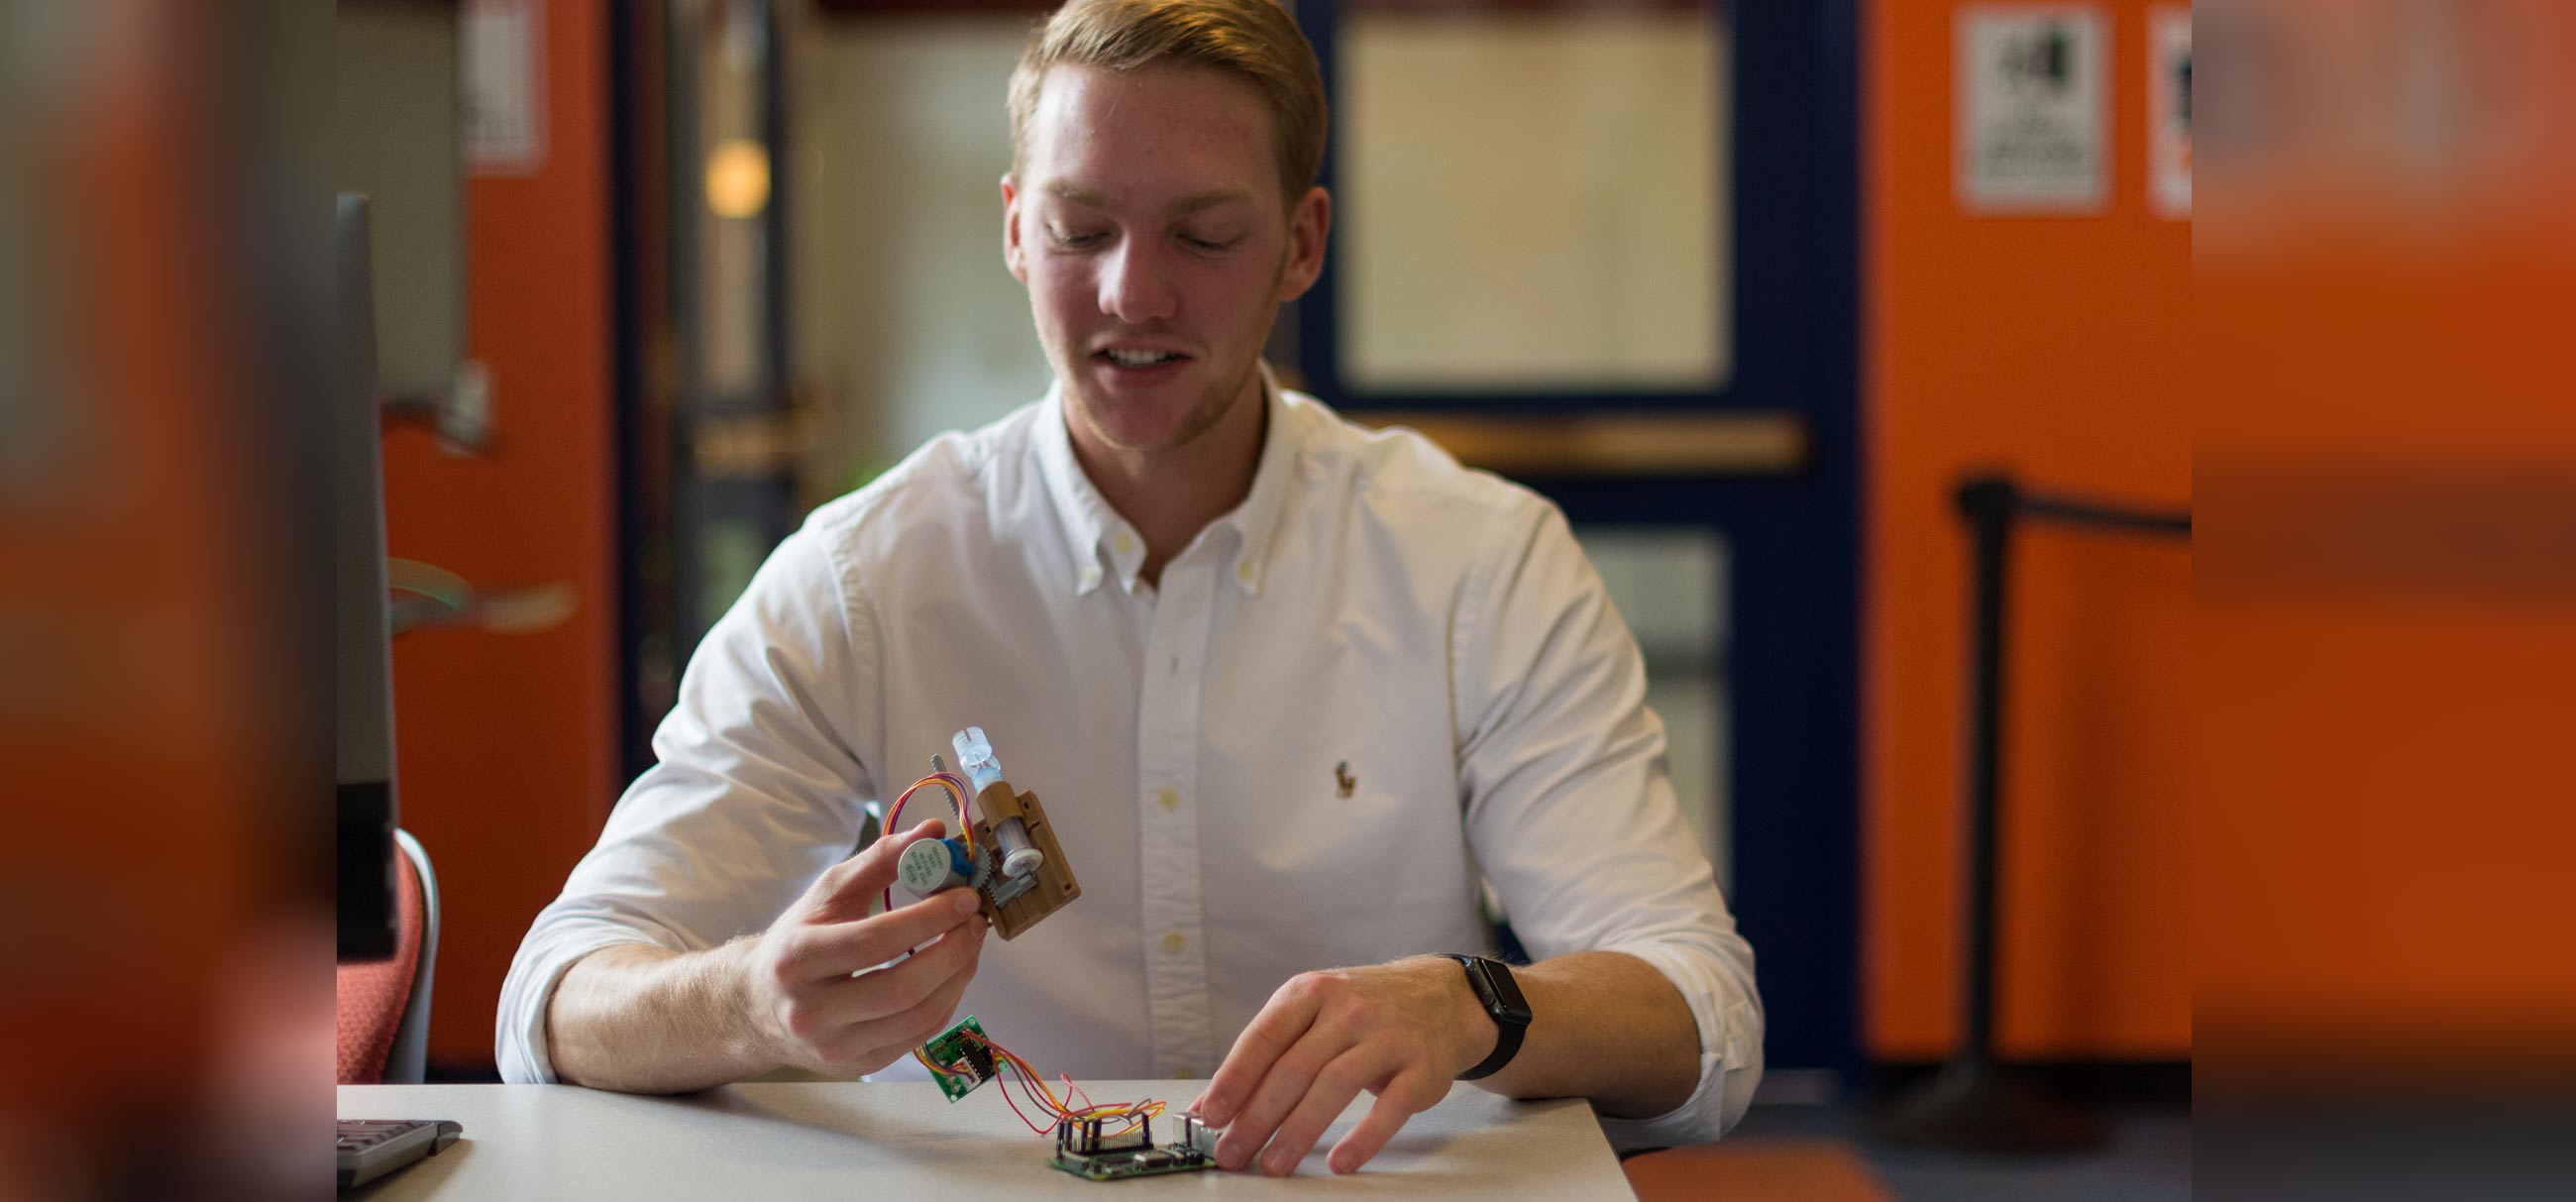 Tyler Mitchell ’20 creates potentially revolutionary medical device in Gettysburg Innovation Lab